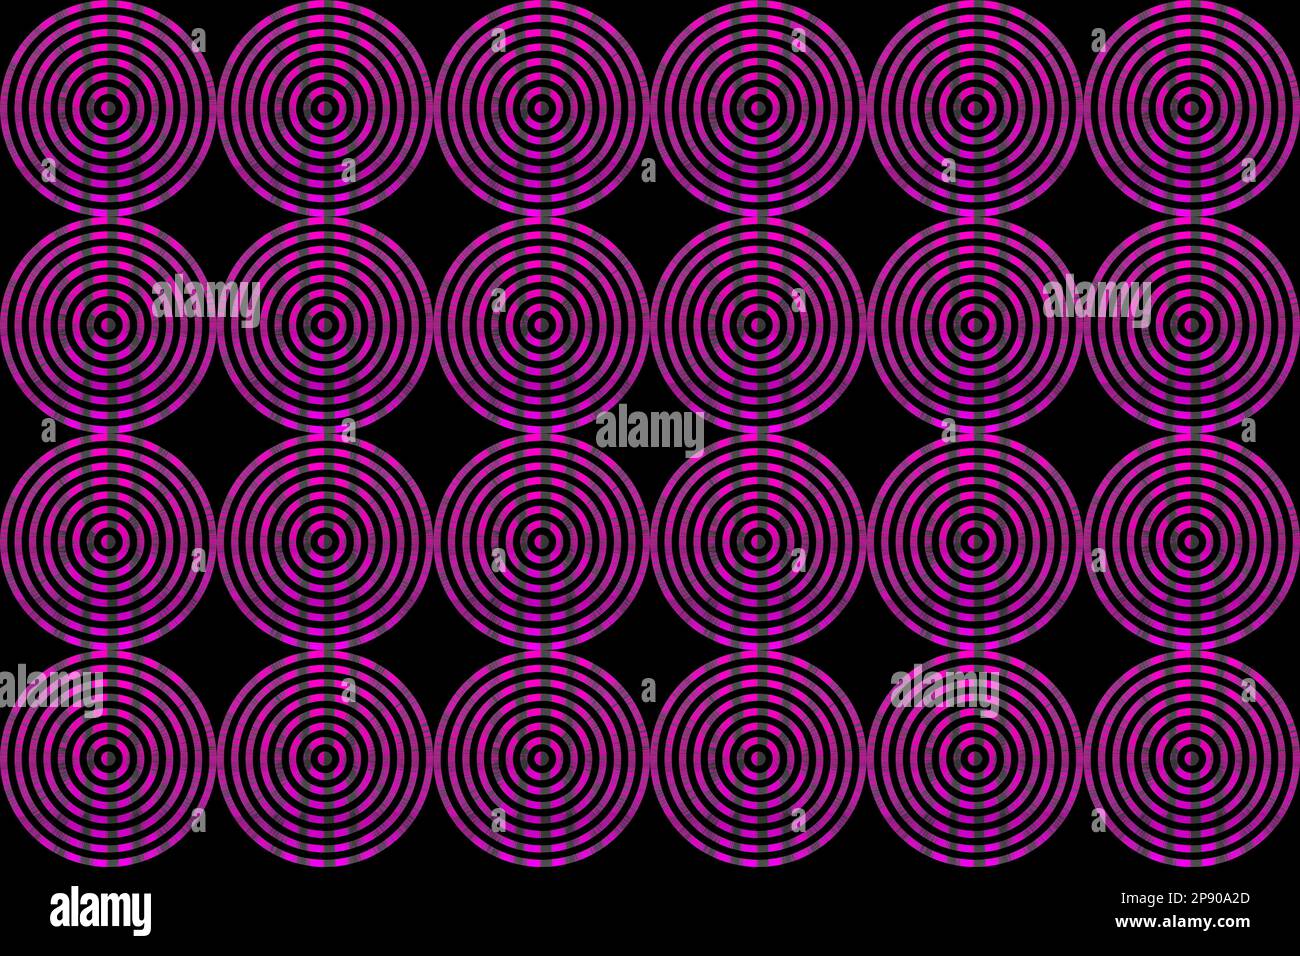 Pink circles with sun rays texture on black background, print pattern Stock Photo